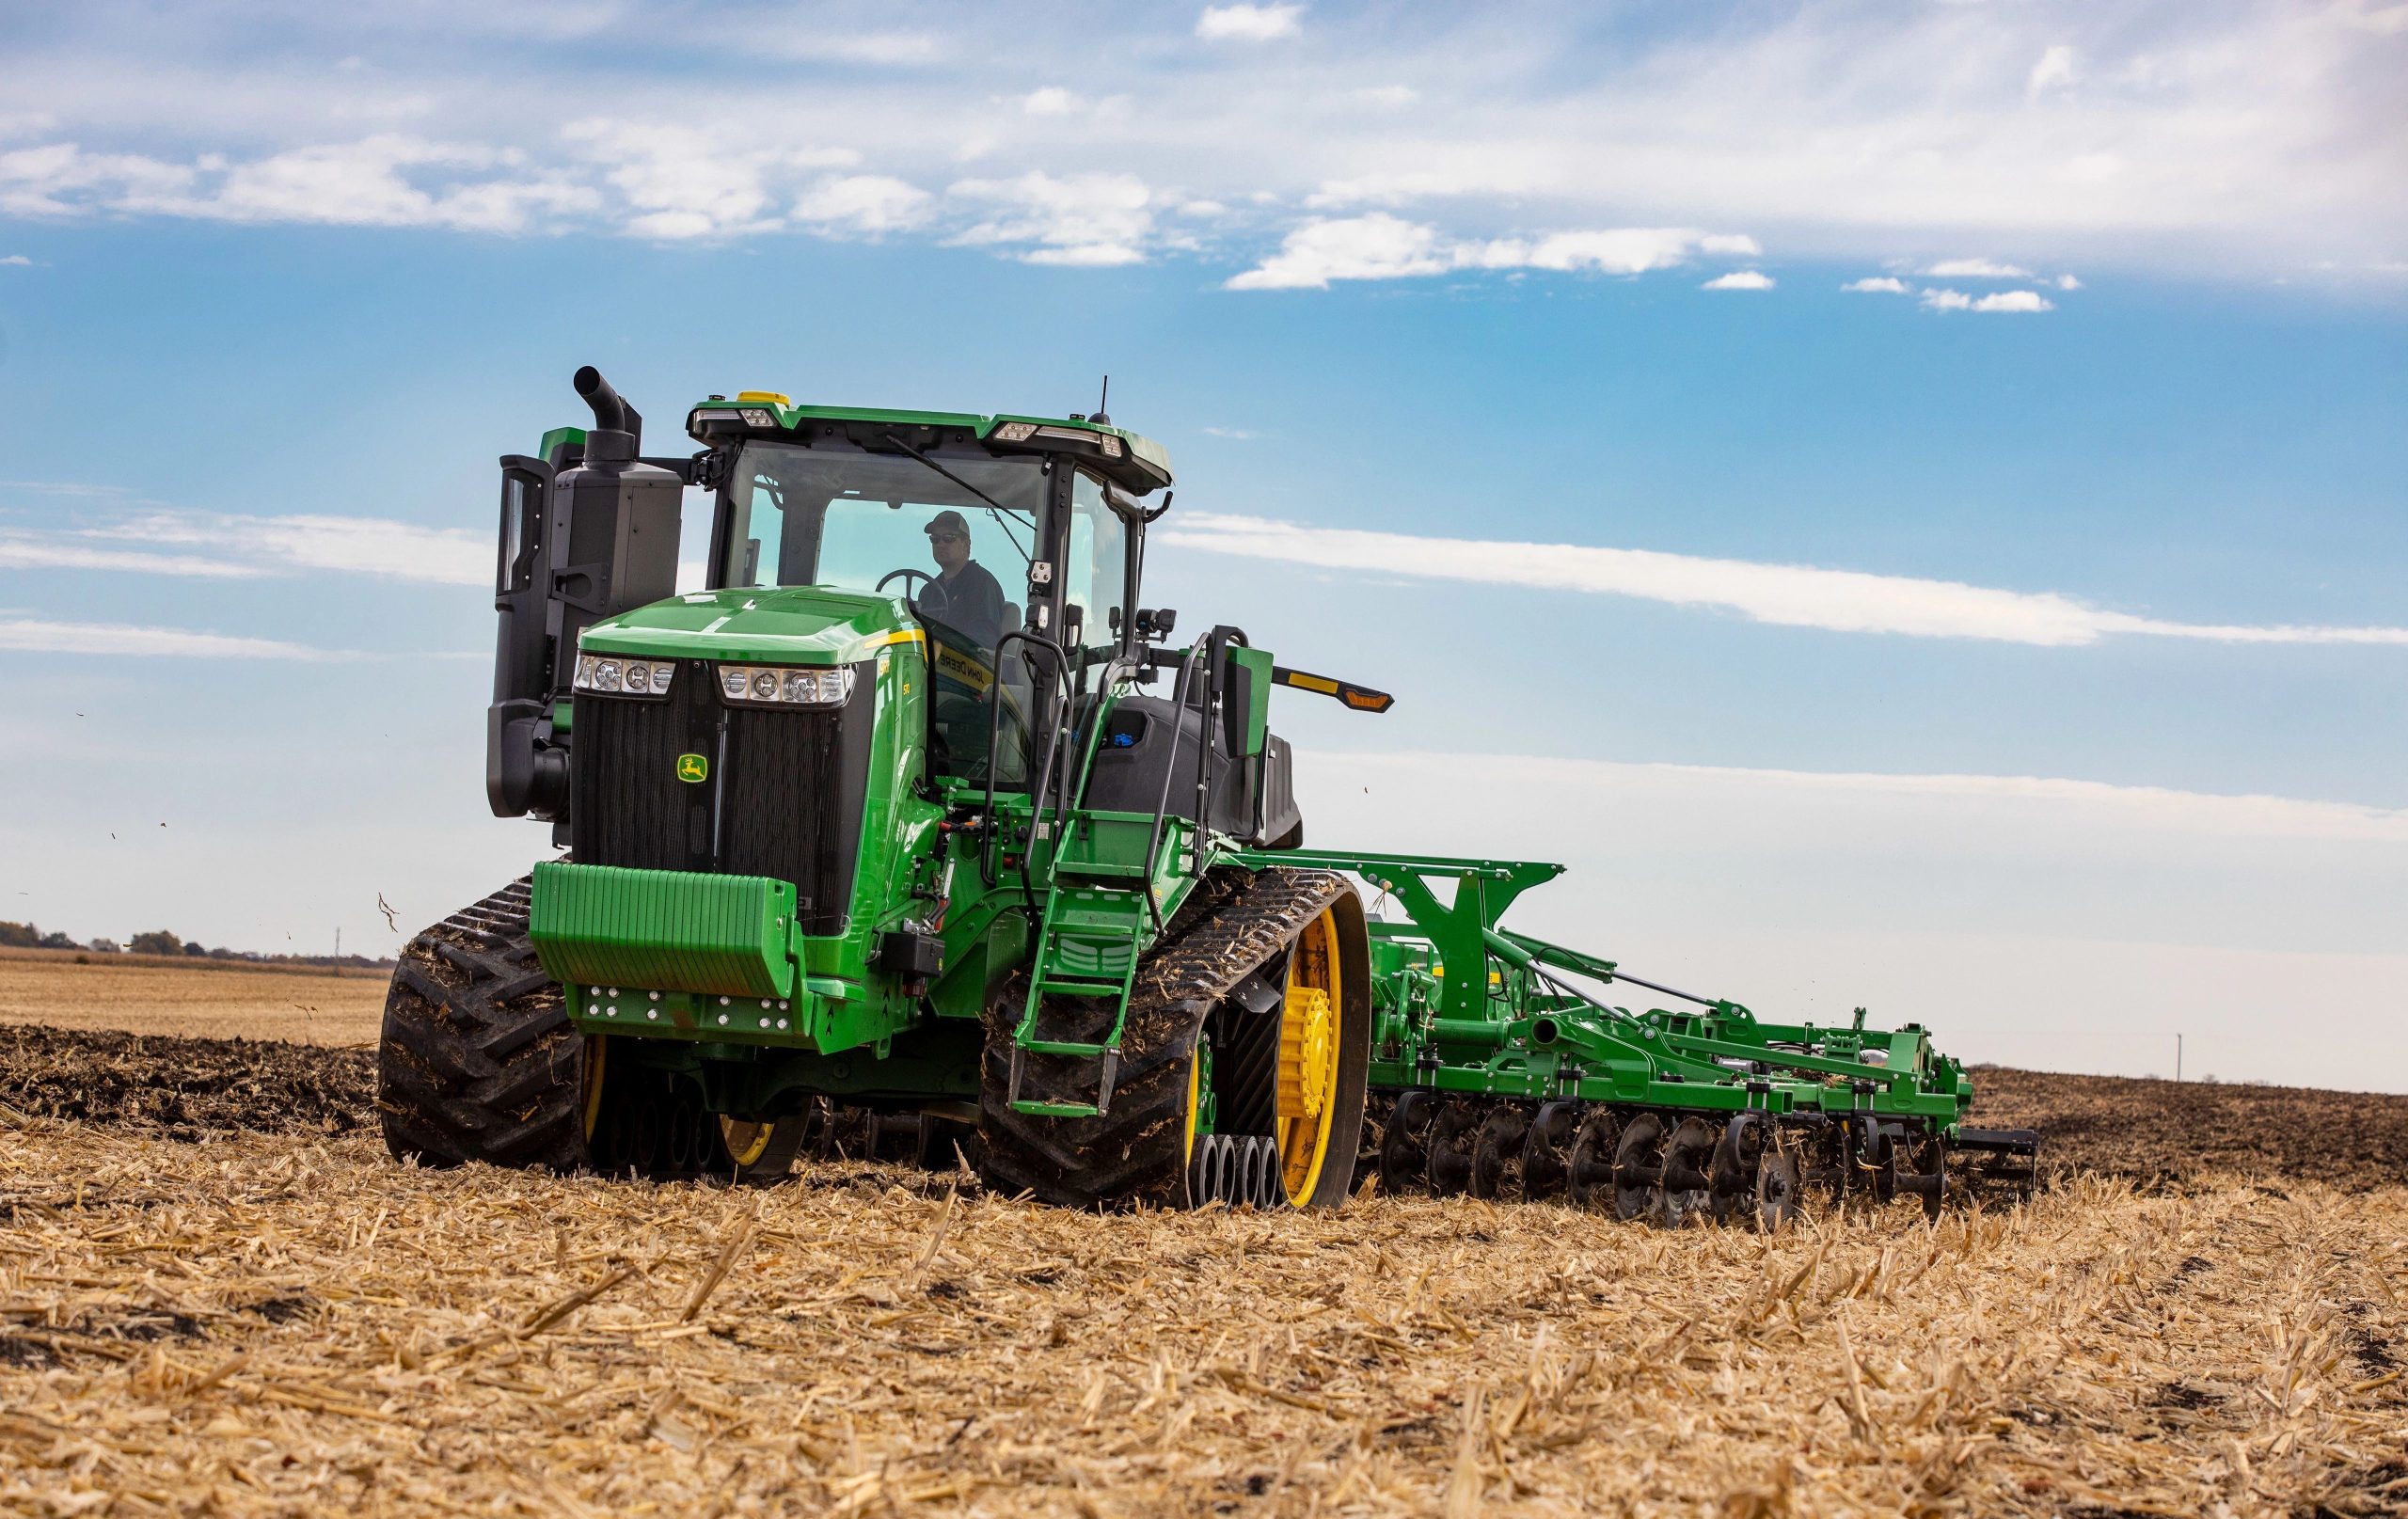 John Deere has added 20 horsepower for all 9RT two-track tractors. (Courtesy photo.)